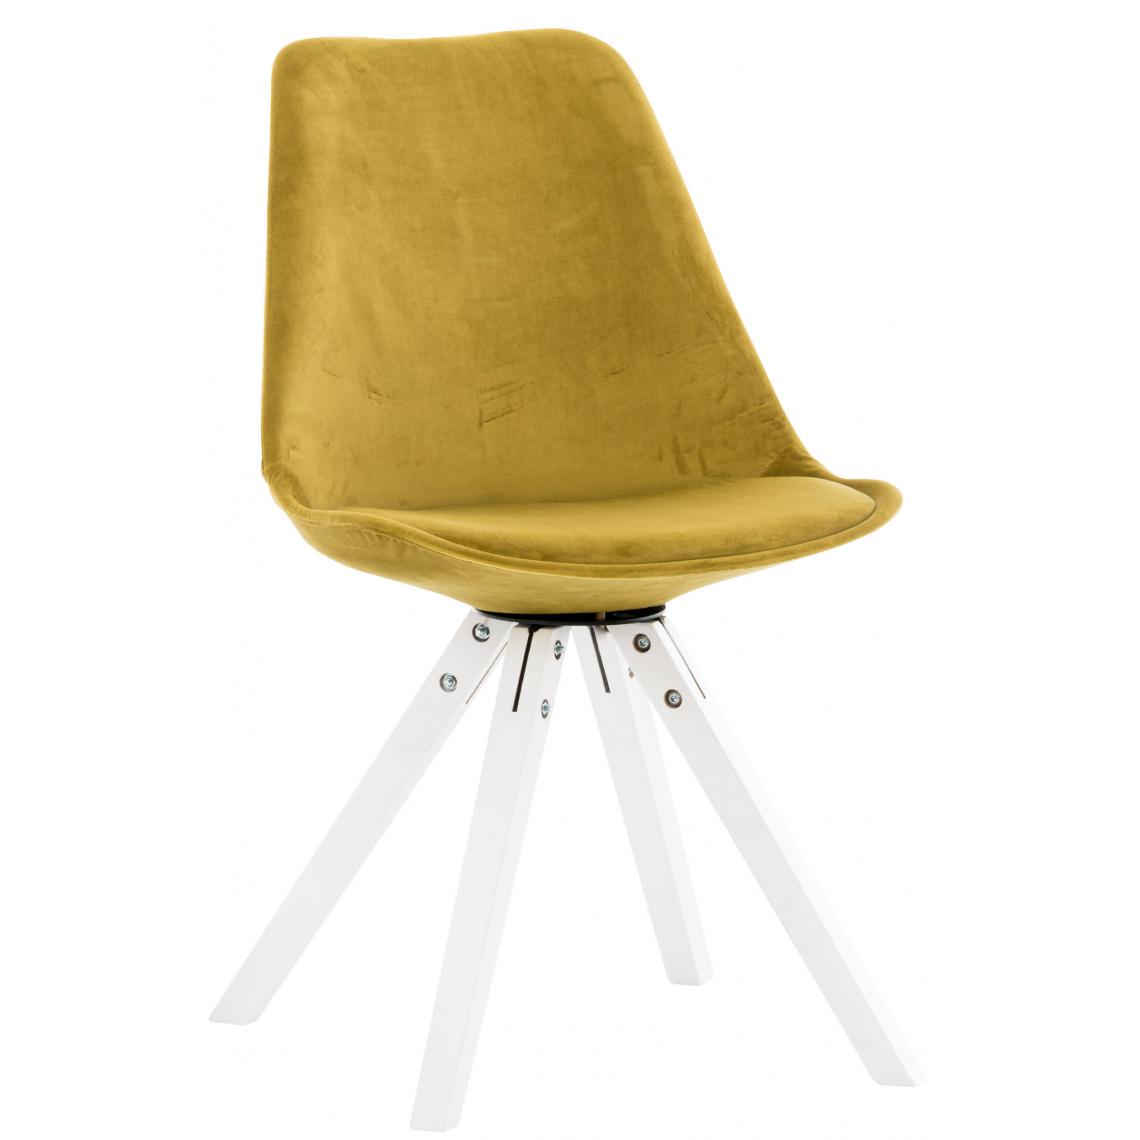 Icaverne - Moderne Chaise gamme Manille Velvet Carrée blanche couleur Jaune - Chaises